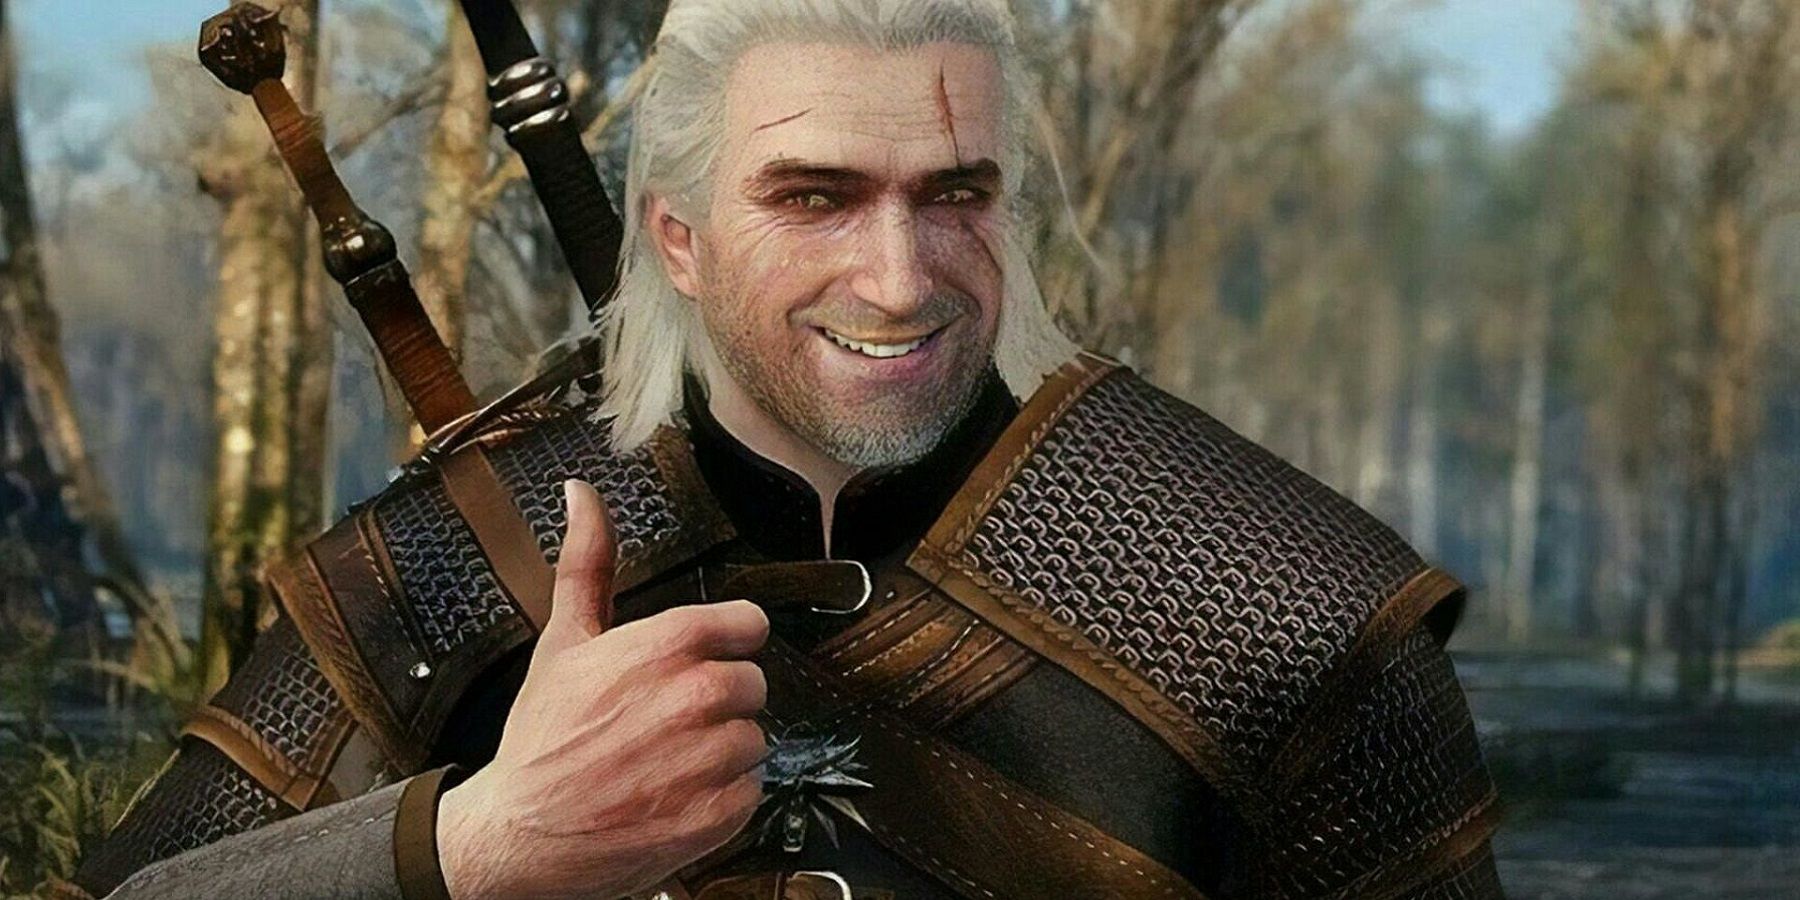 Image from The Witcher 3 showing Geralt of Rivia smiling and givig a thumbs up.